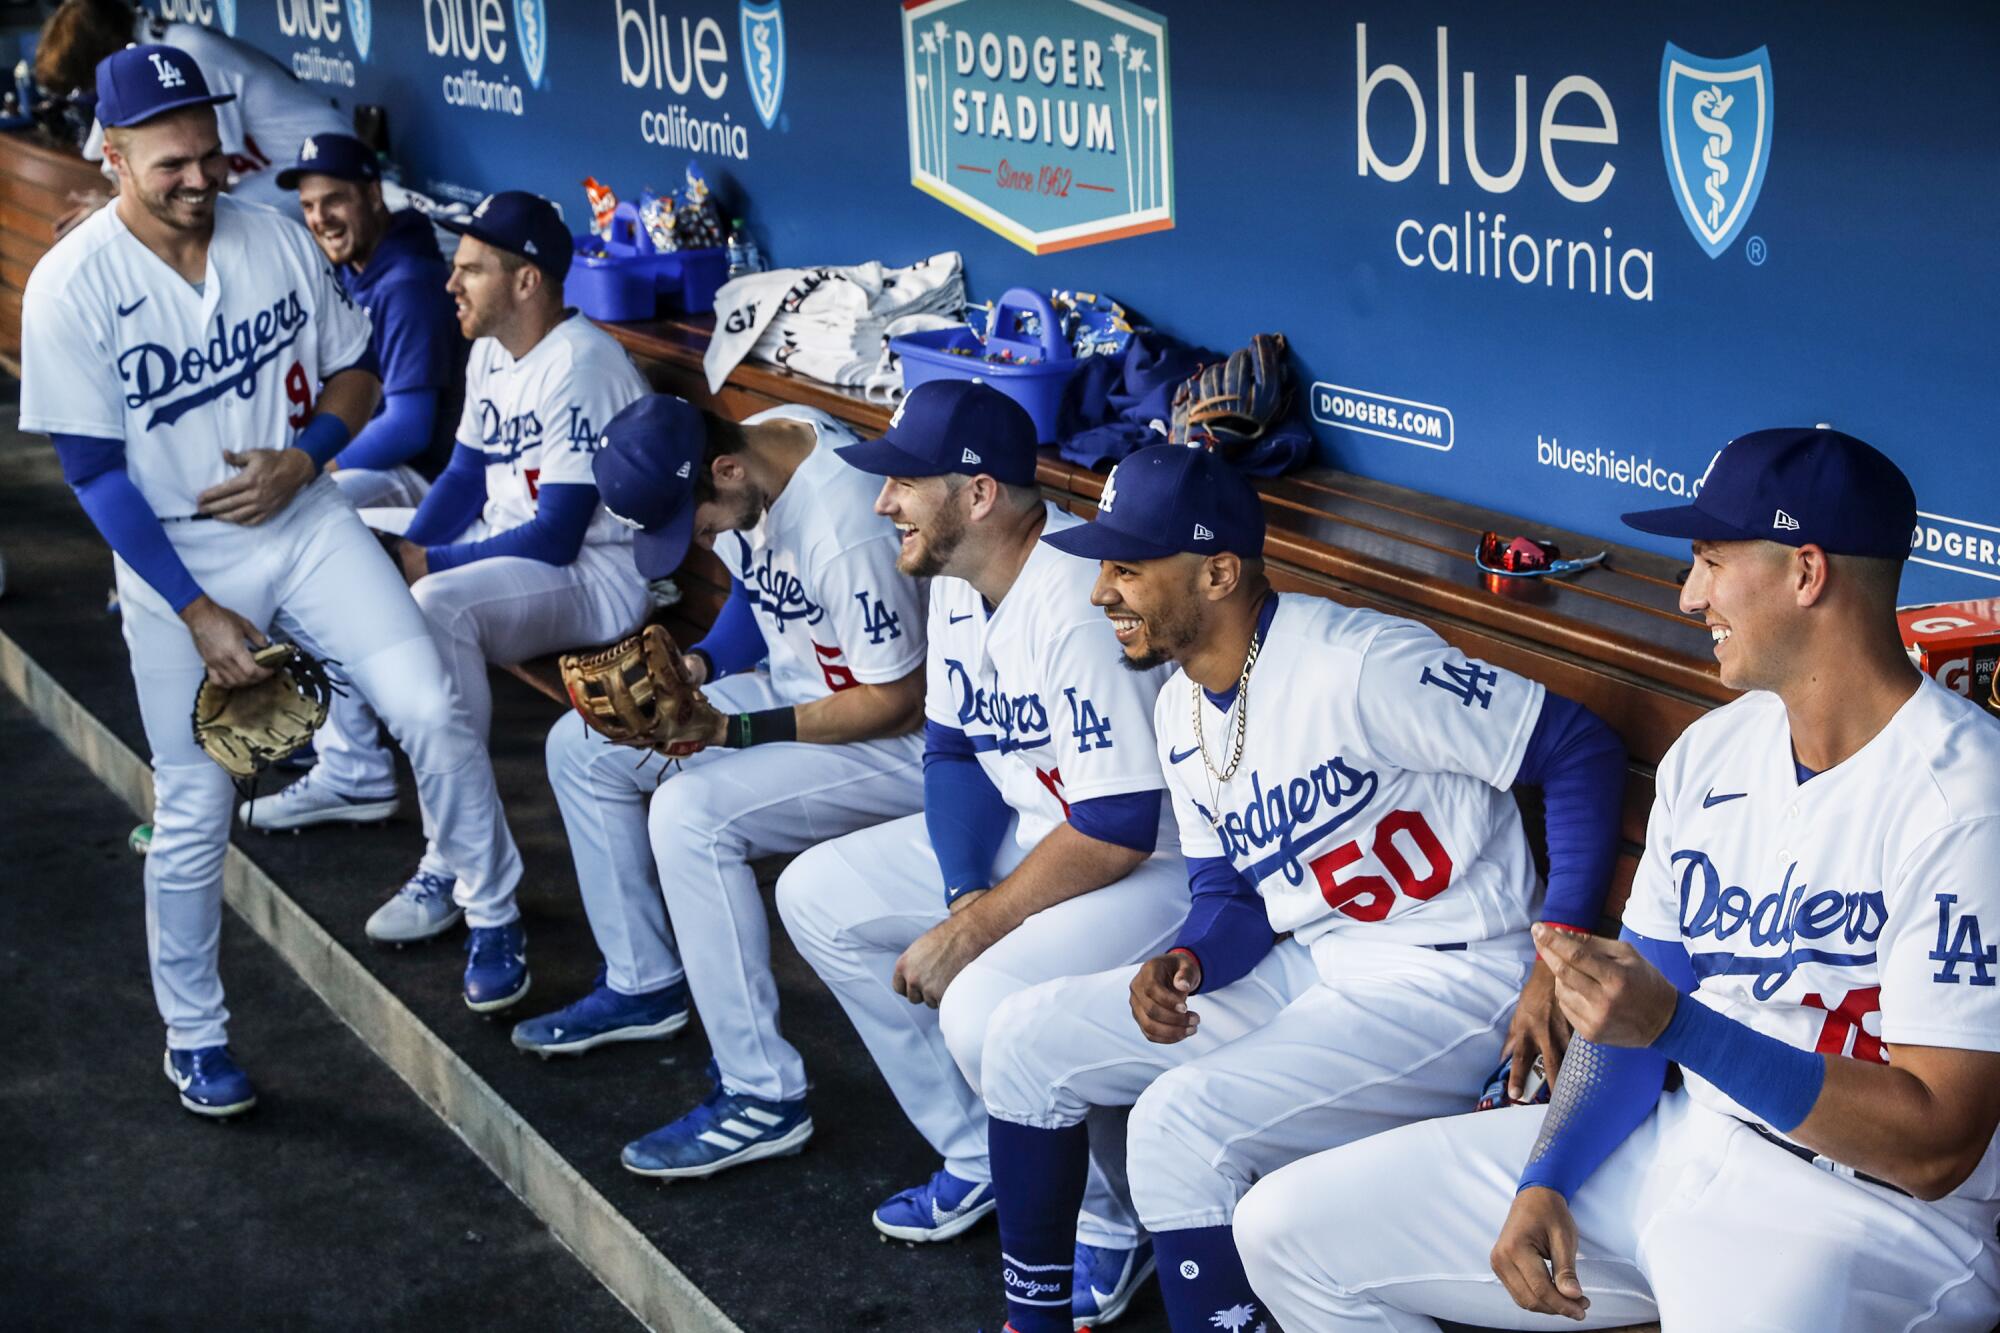 Dodgers teammates share a laugh in the dugout before taking on the Colorado Rockies at Dodger Stadium Tuesday.